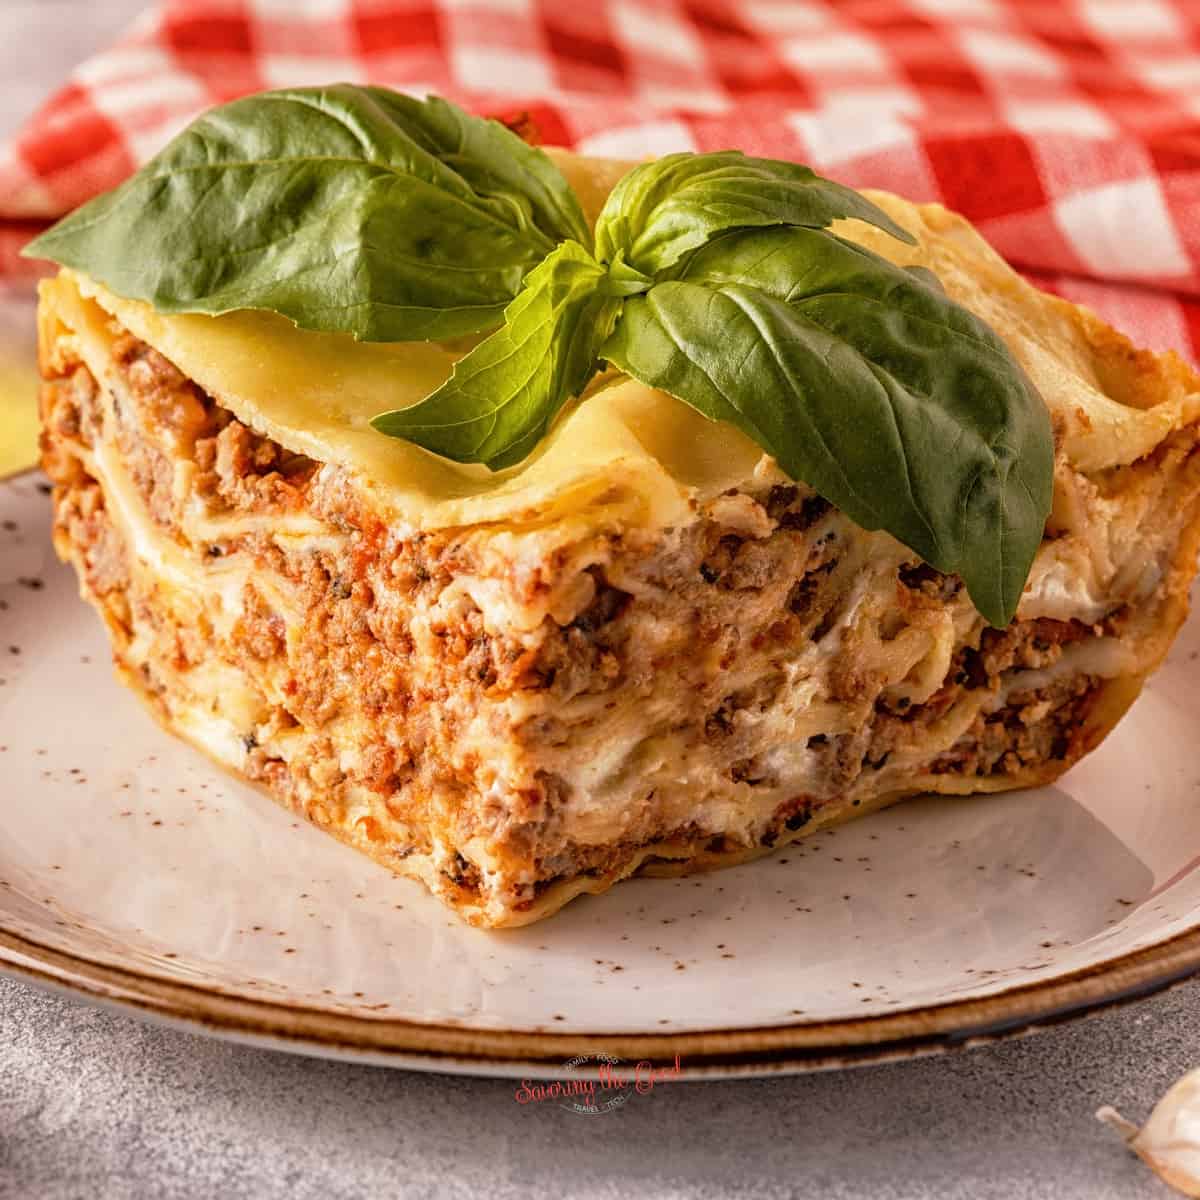 A slice of lasagna on a plate to showcase side dishes to serve with lasagna dinner.